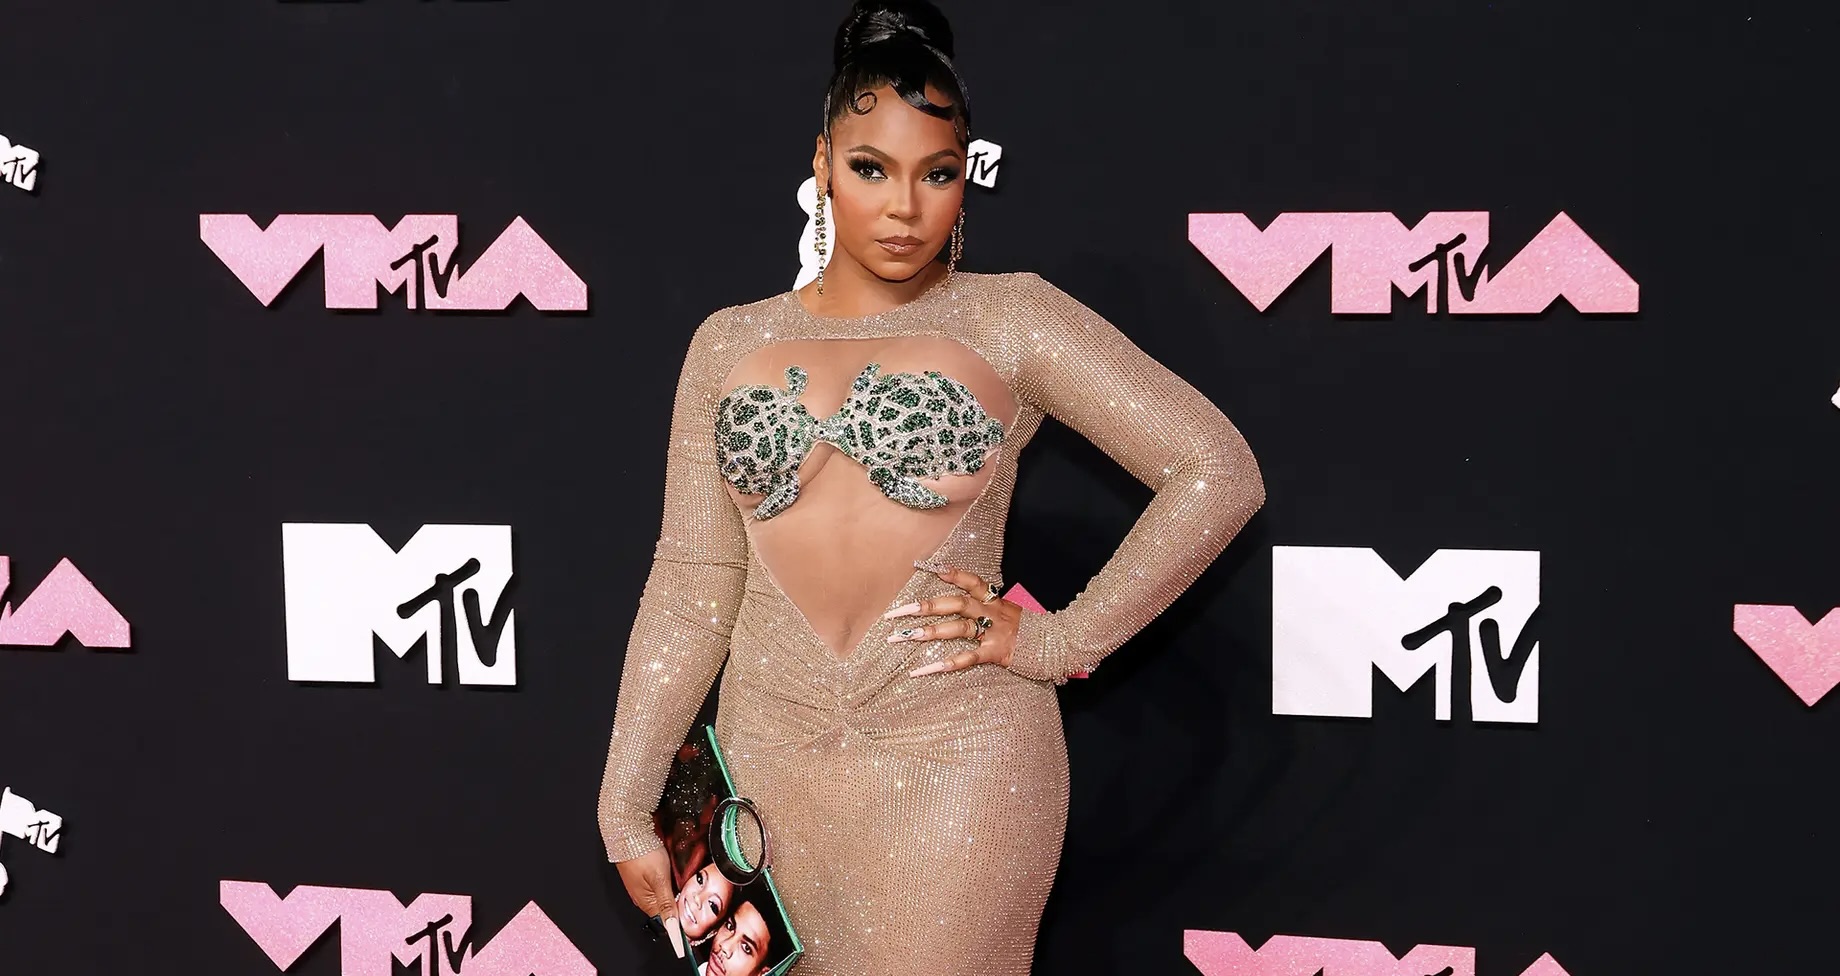 Ashanti Recalls Getting Nelly’s Number at VMAs 20 Years Ago, Takes Purse With Throwback Pic of Them to 2023 Show